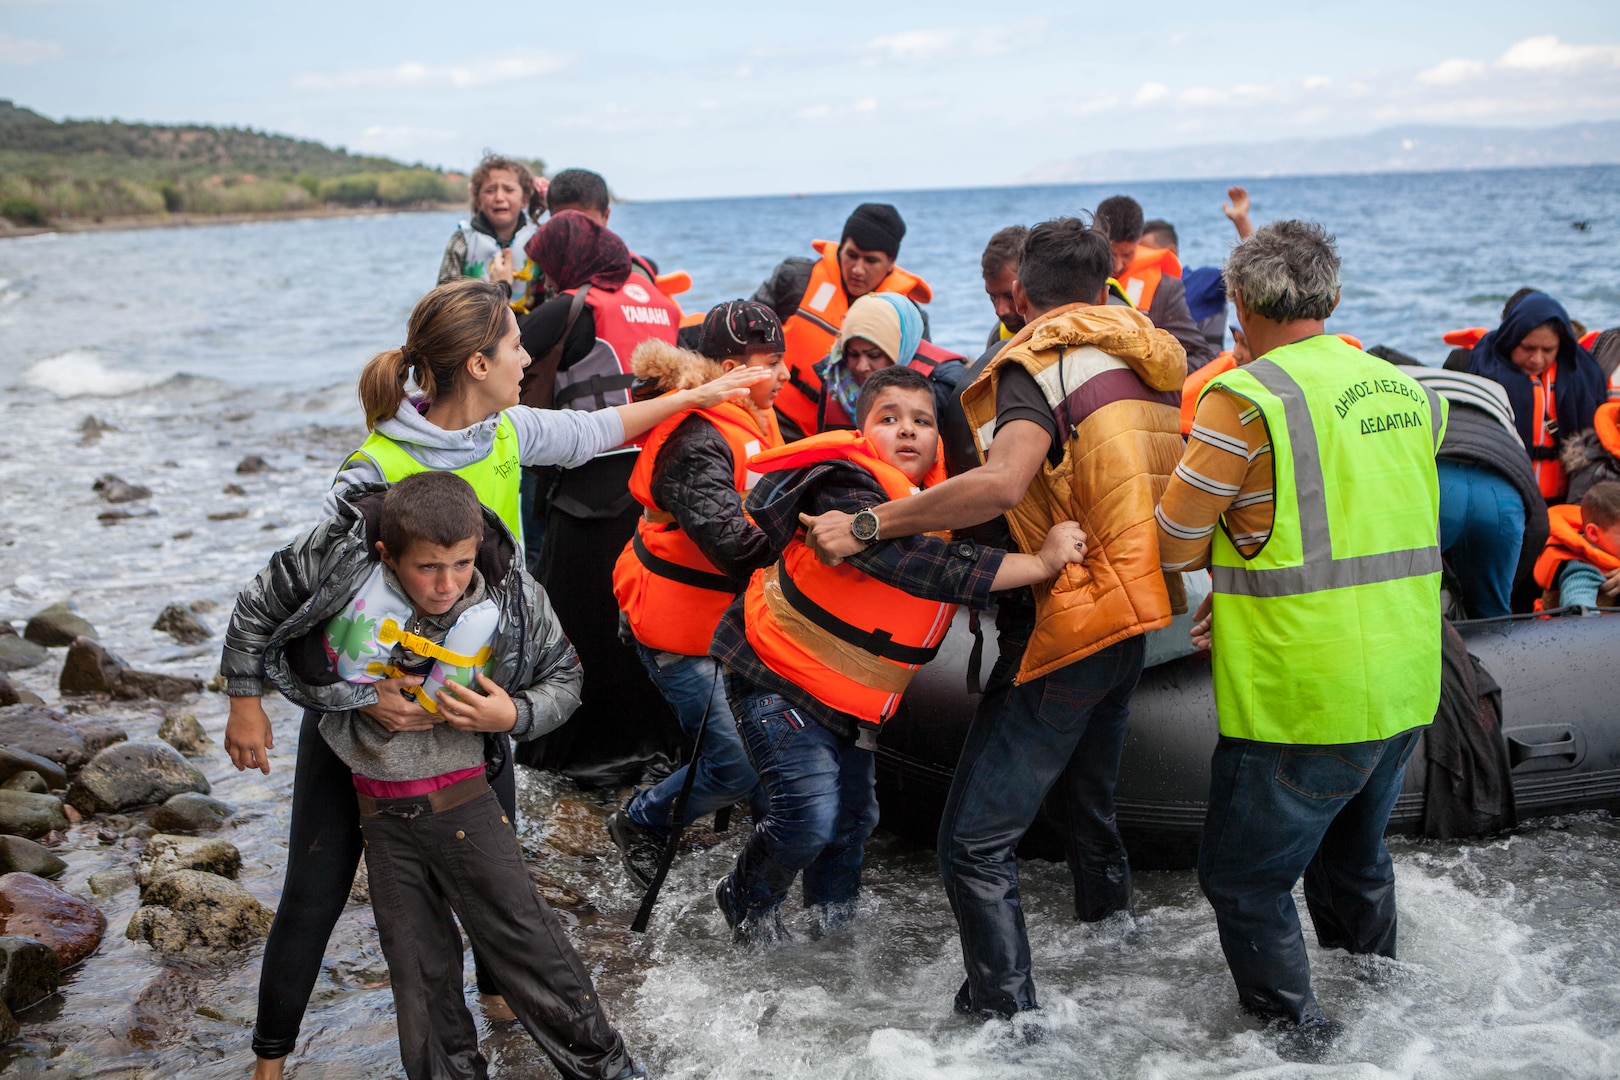 Syrian and Iraqi immigrants getting off a boat from Turkey on the Greek island of Lesbos.